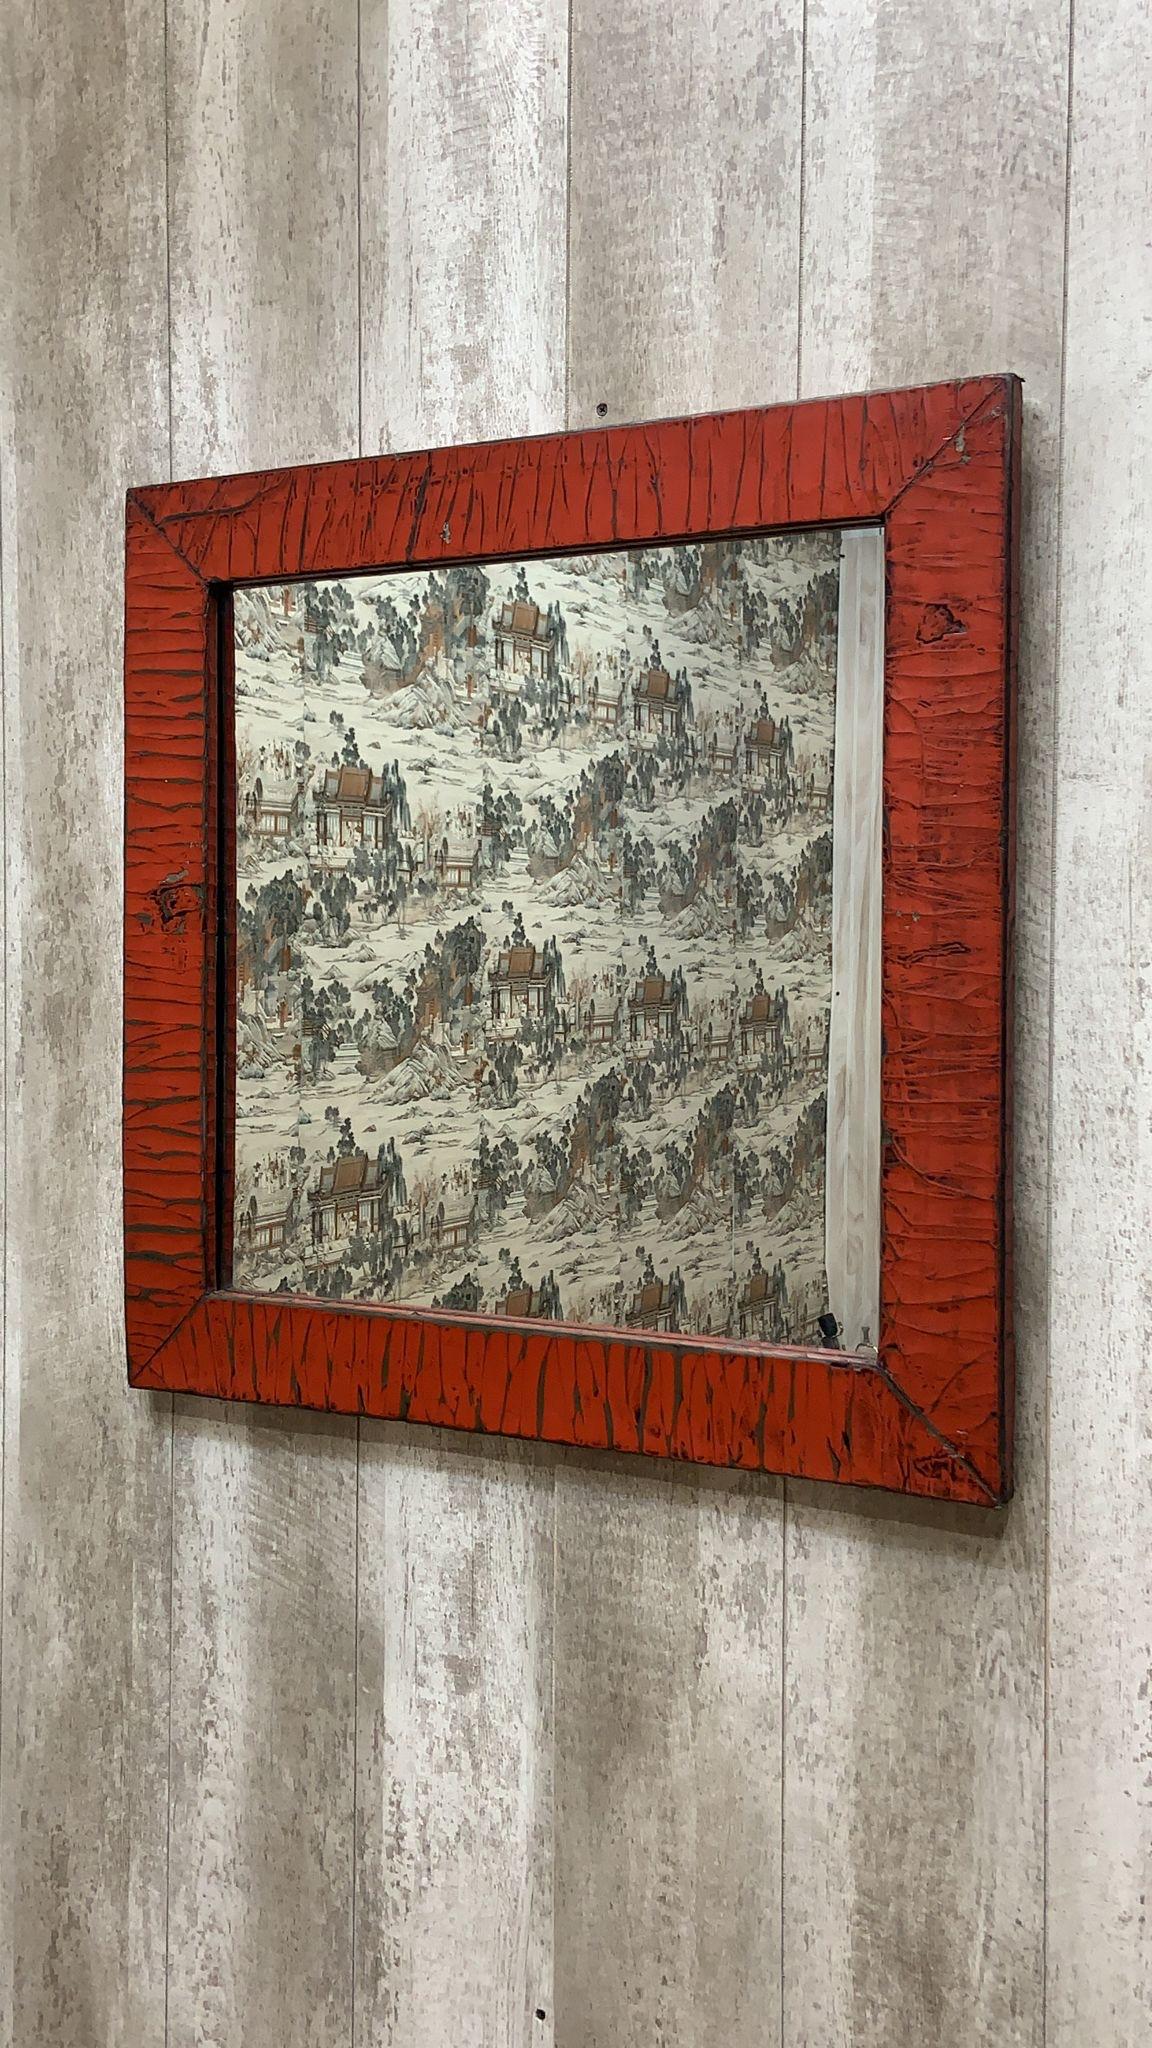 Vintage Chinese Red Linen Wrapped Square Mirror

This Vintage Chinese Province Red Linen Wrapped Square Mirror is a perfect piece to elevate any room. Hand crafted in the Shanxi Province of China, the mirror is linen wrapped with lacquer. The mirror